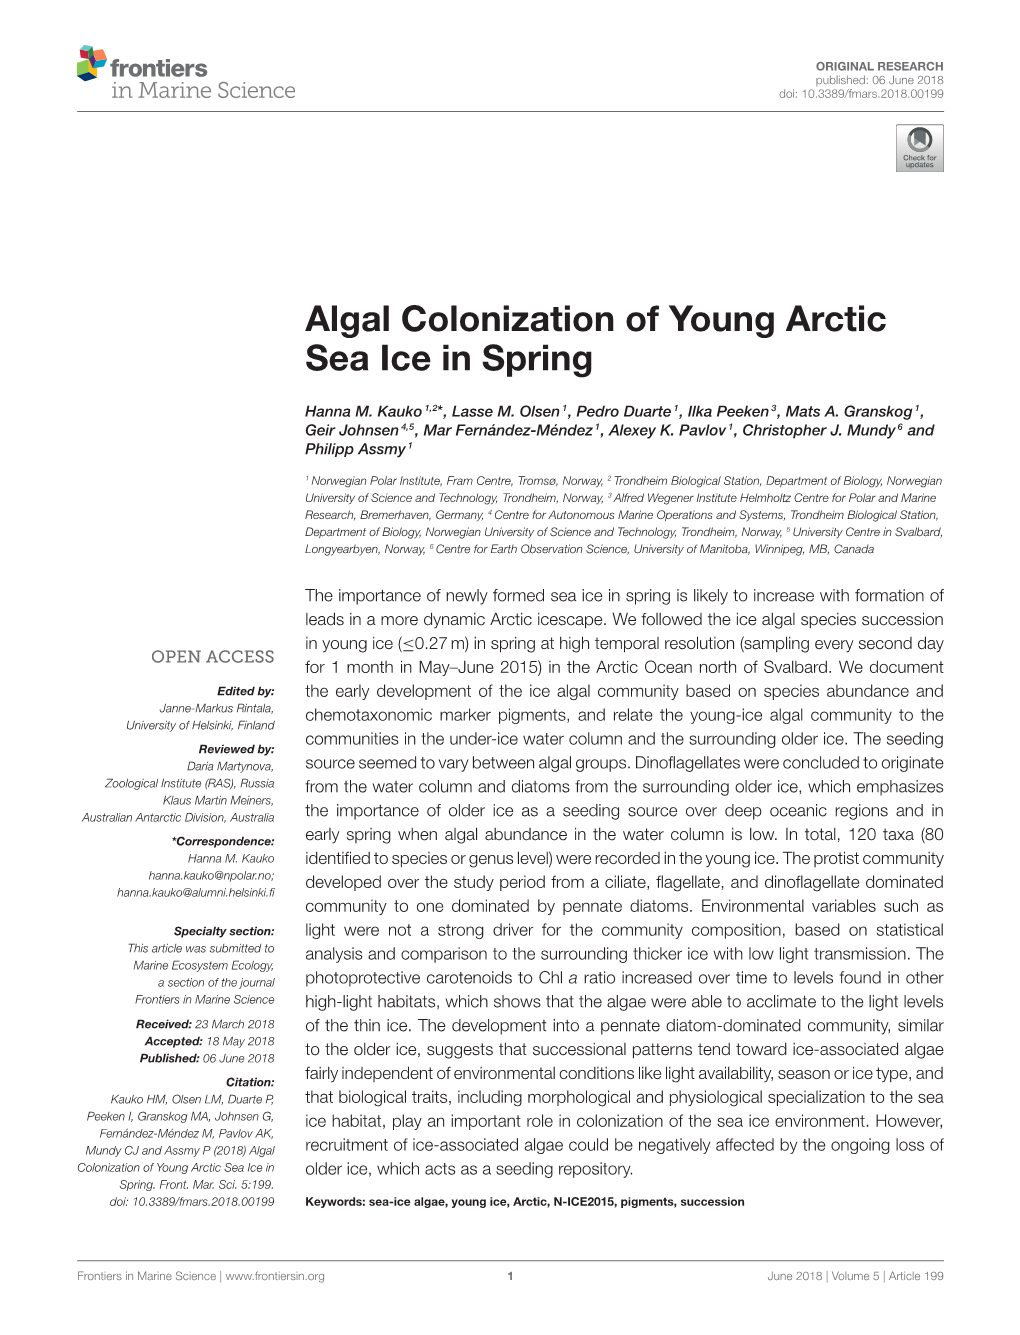 Algal Colonization of Young Arctic Sea Ice in Spring